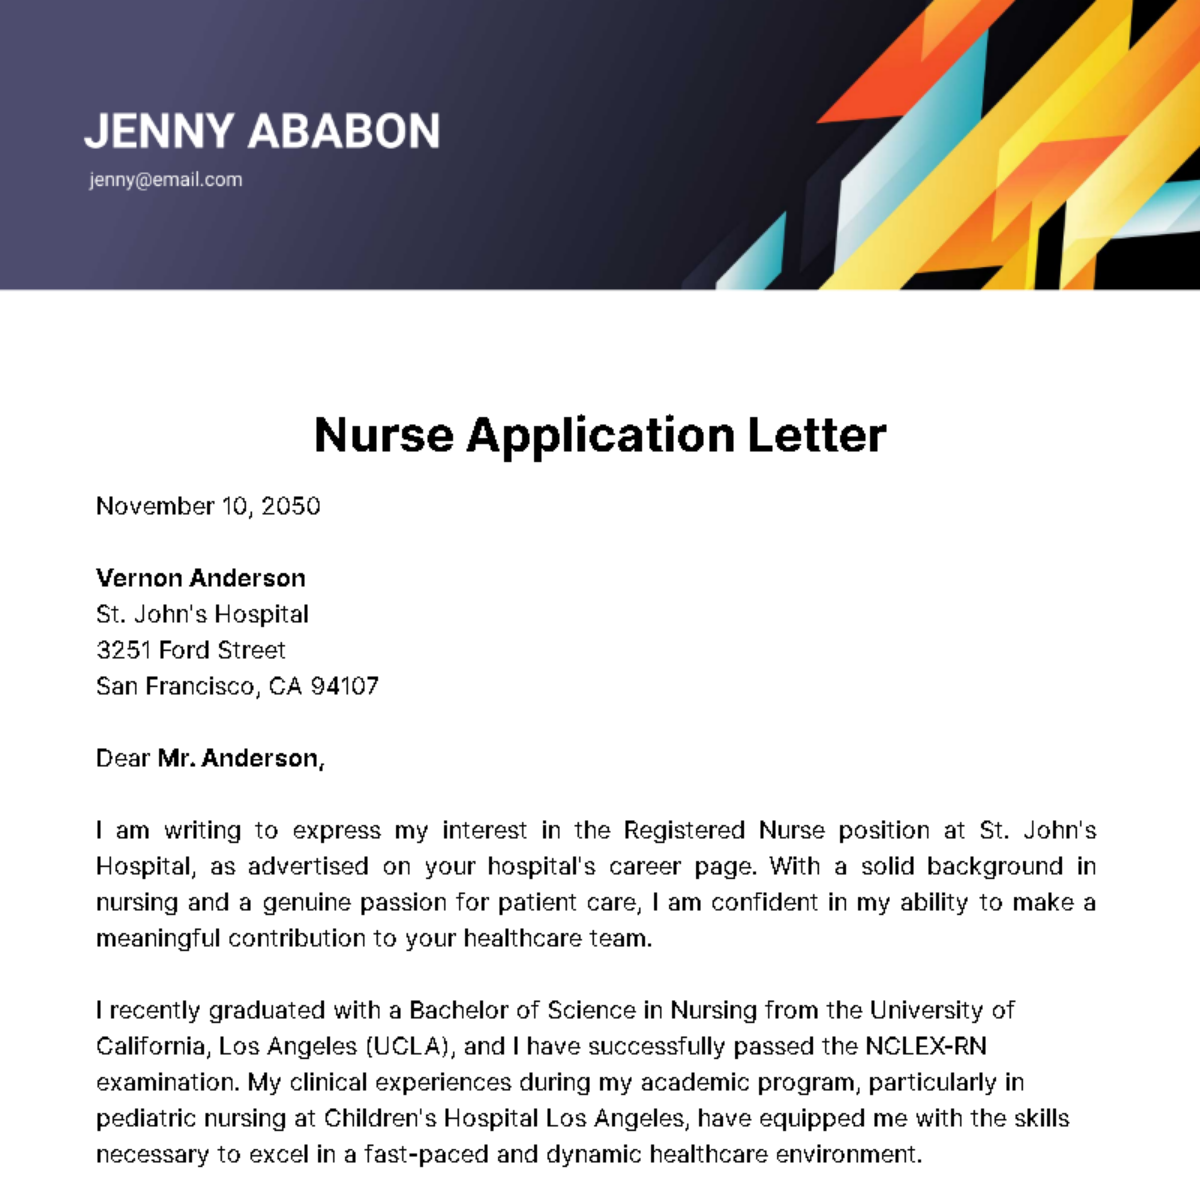 FREE Application Letter Templates & Examples - Edit Online & Download